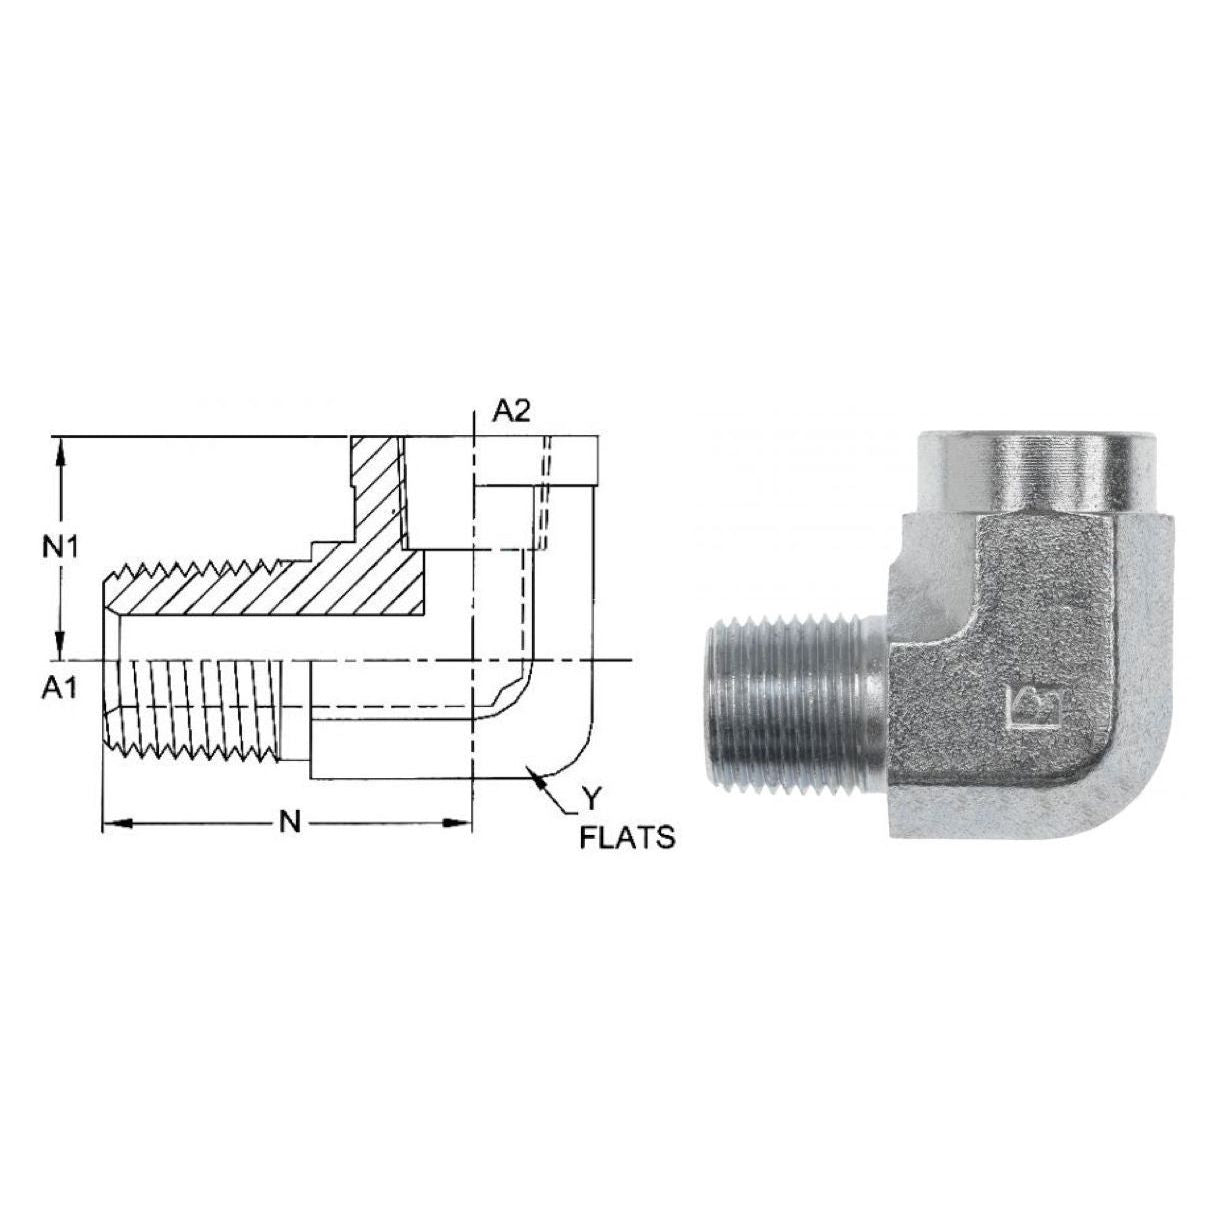 5502-08-06-SS : OneHydraulics 90-Degree Street Elbow, 0.5 (1/2) Male NPT x 0.375 (3/8) Female NPT, Stainless Steel, 6000psi